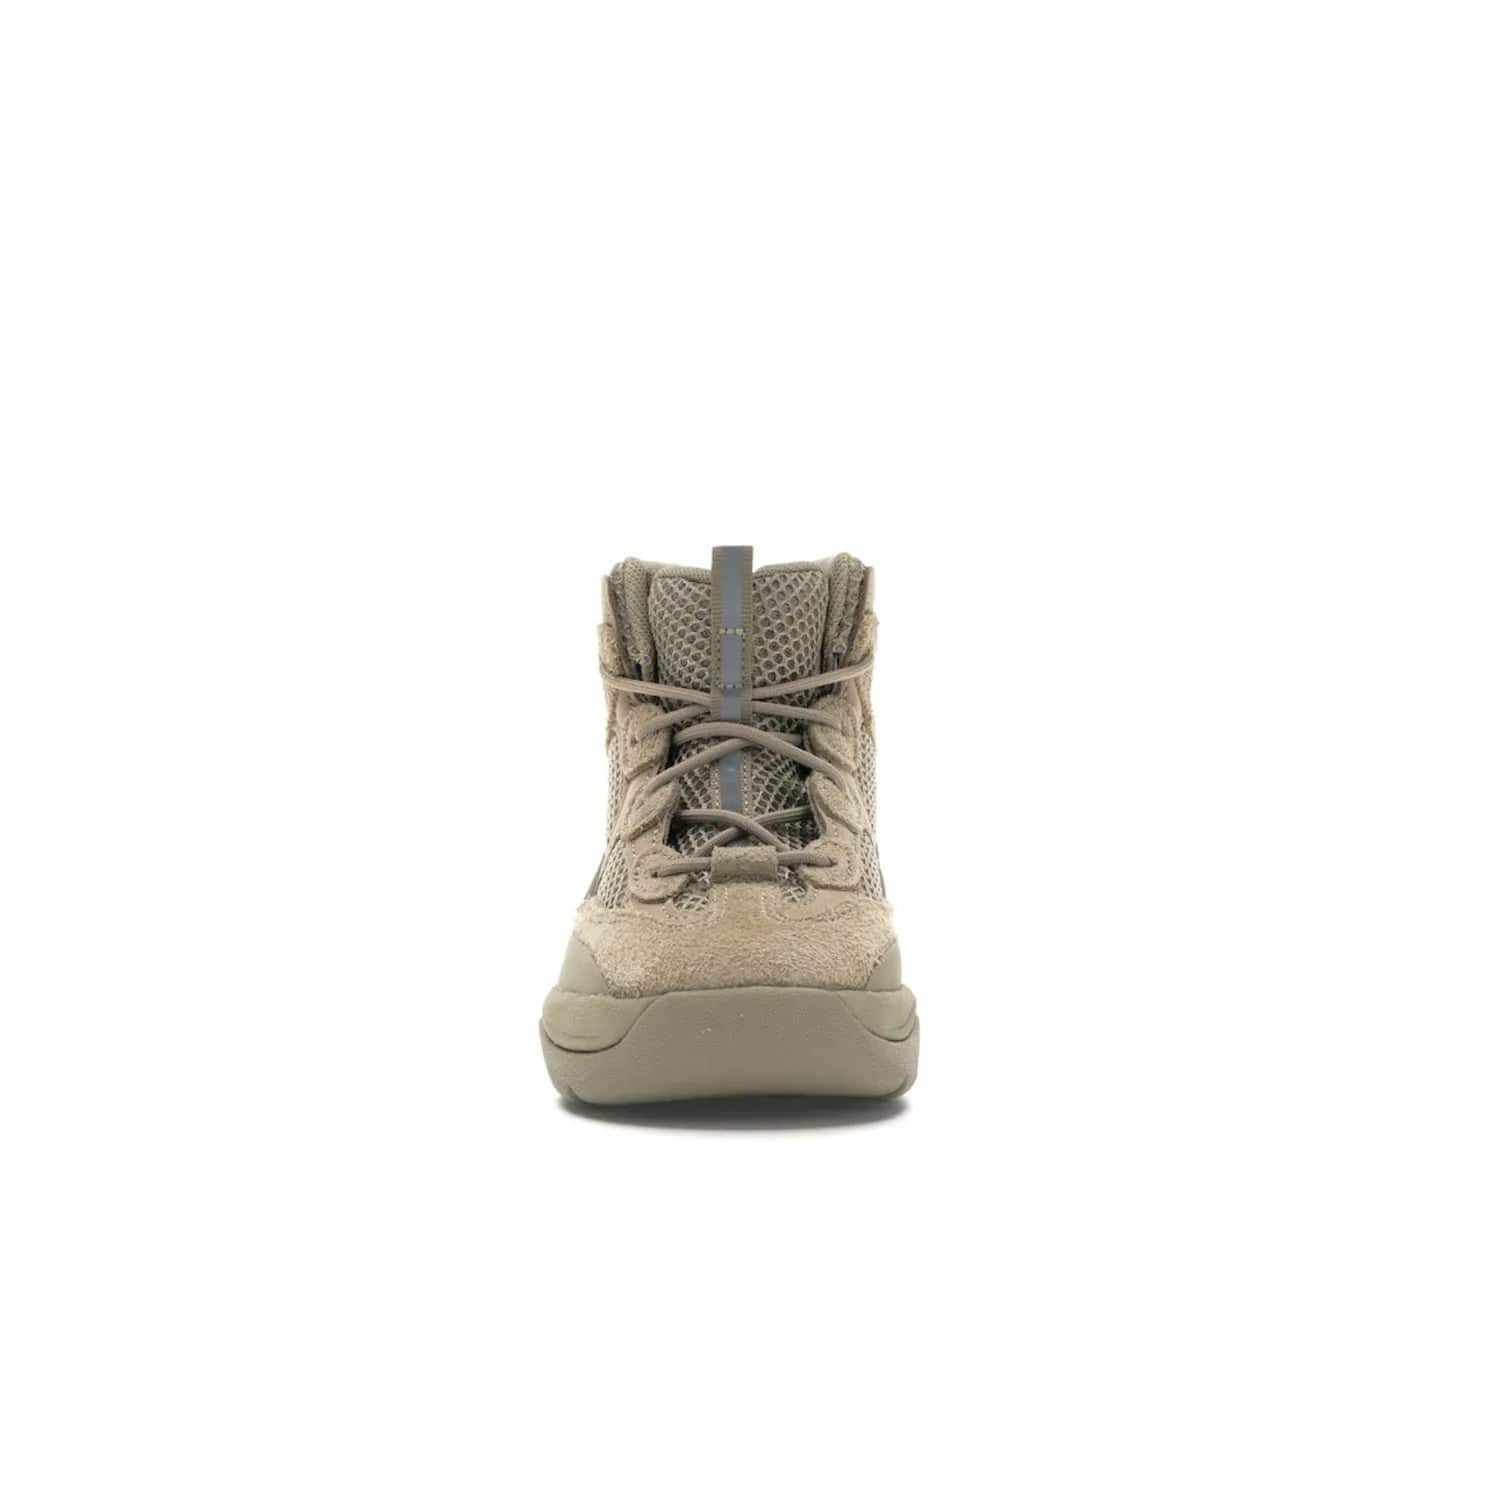 adidas Yeezy Desert Boot Rock (Kids) - Image 10 - Only at www.BallersClubKickz.com - Elevate your style this season with the adidas Yeezy Desert Boot Rock. Crafted from layered nylon and suede, this chic kids' silhouette features an EVA midsole and rubber outsole for superior cushioning and traction.